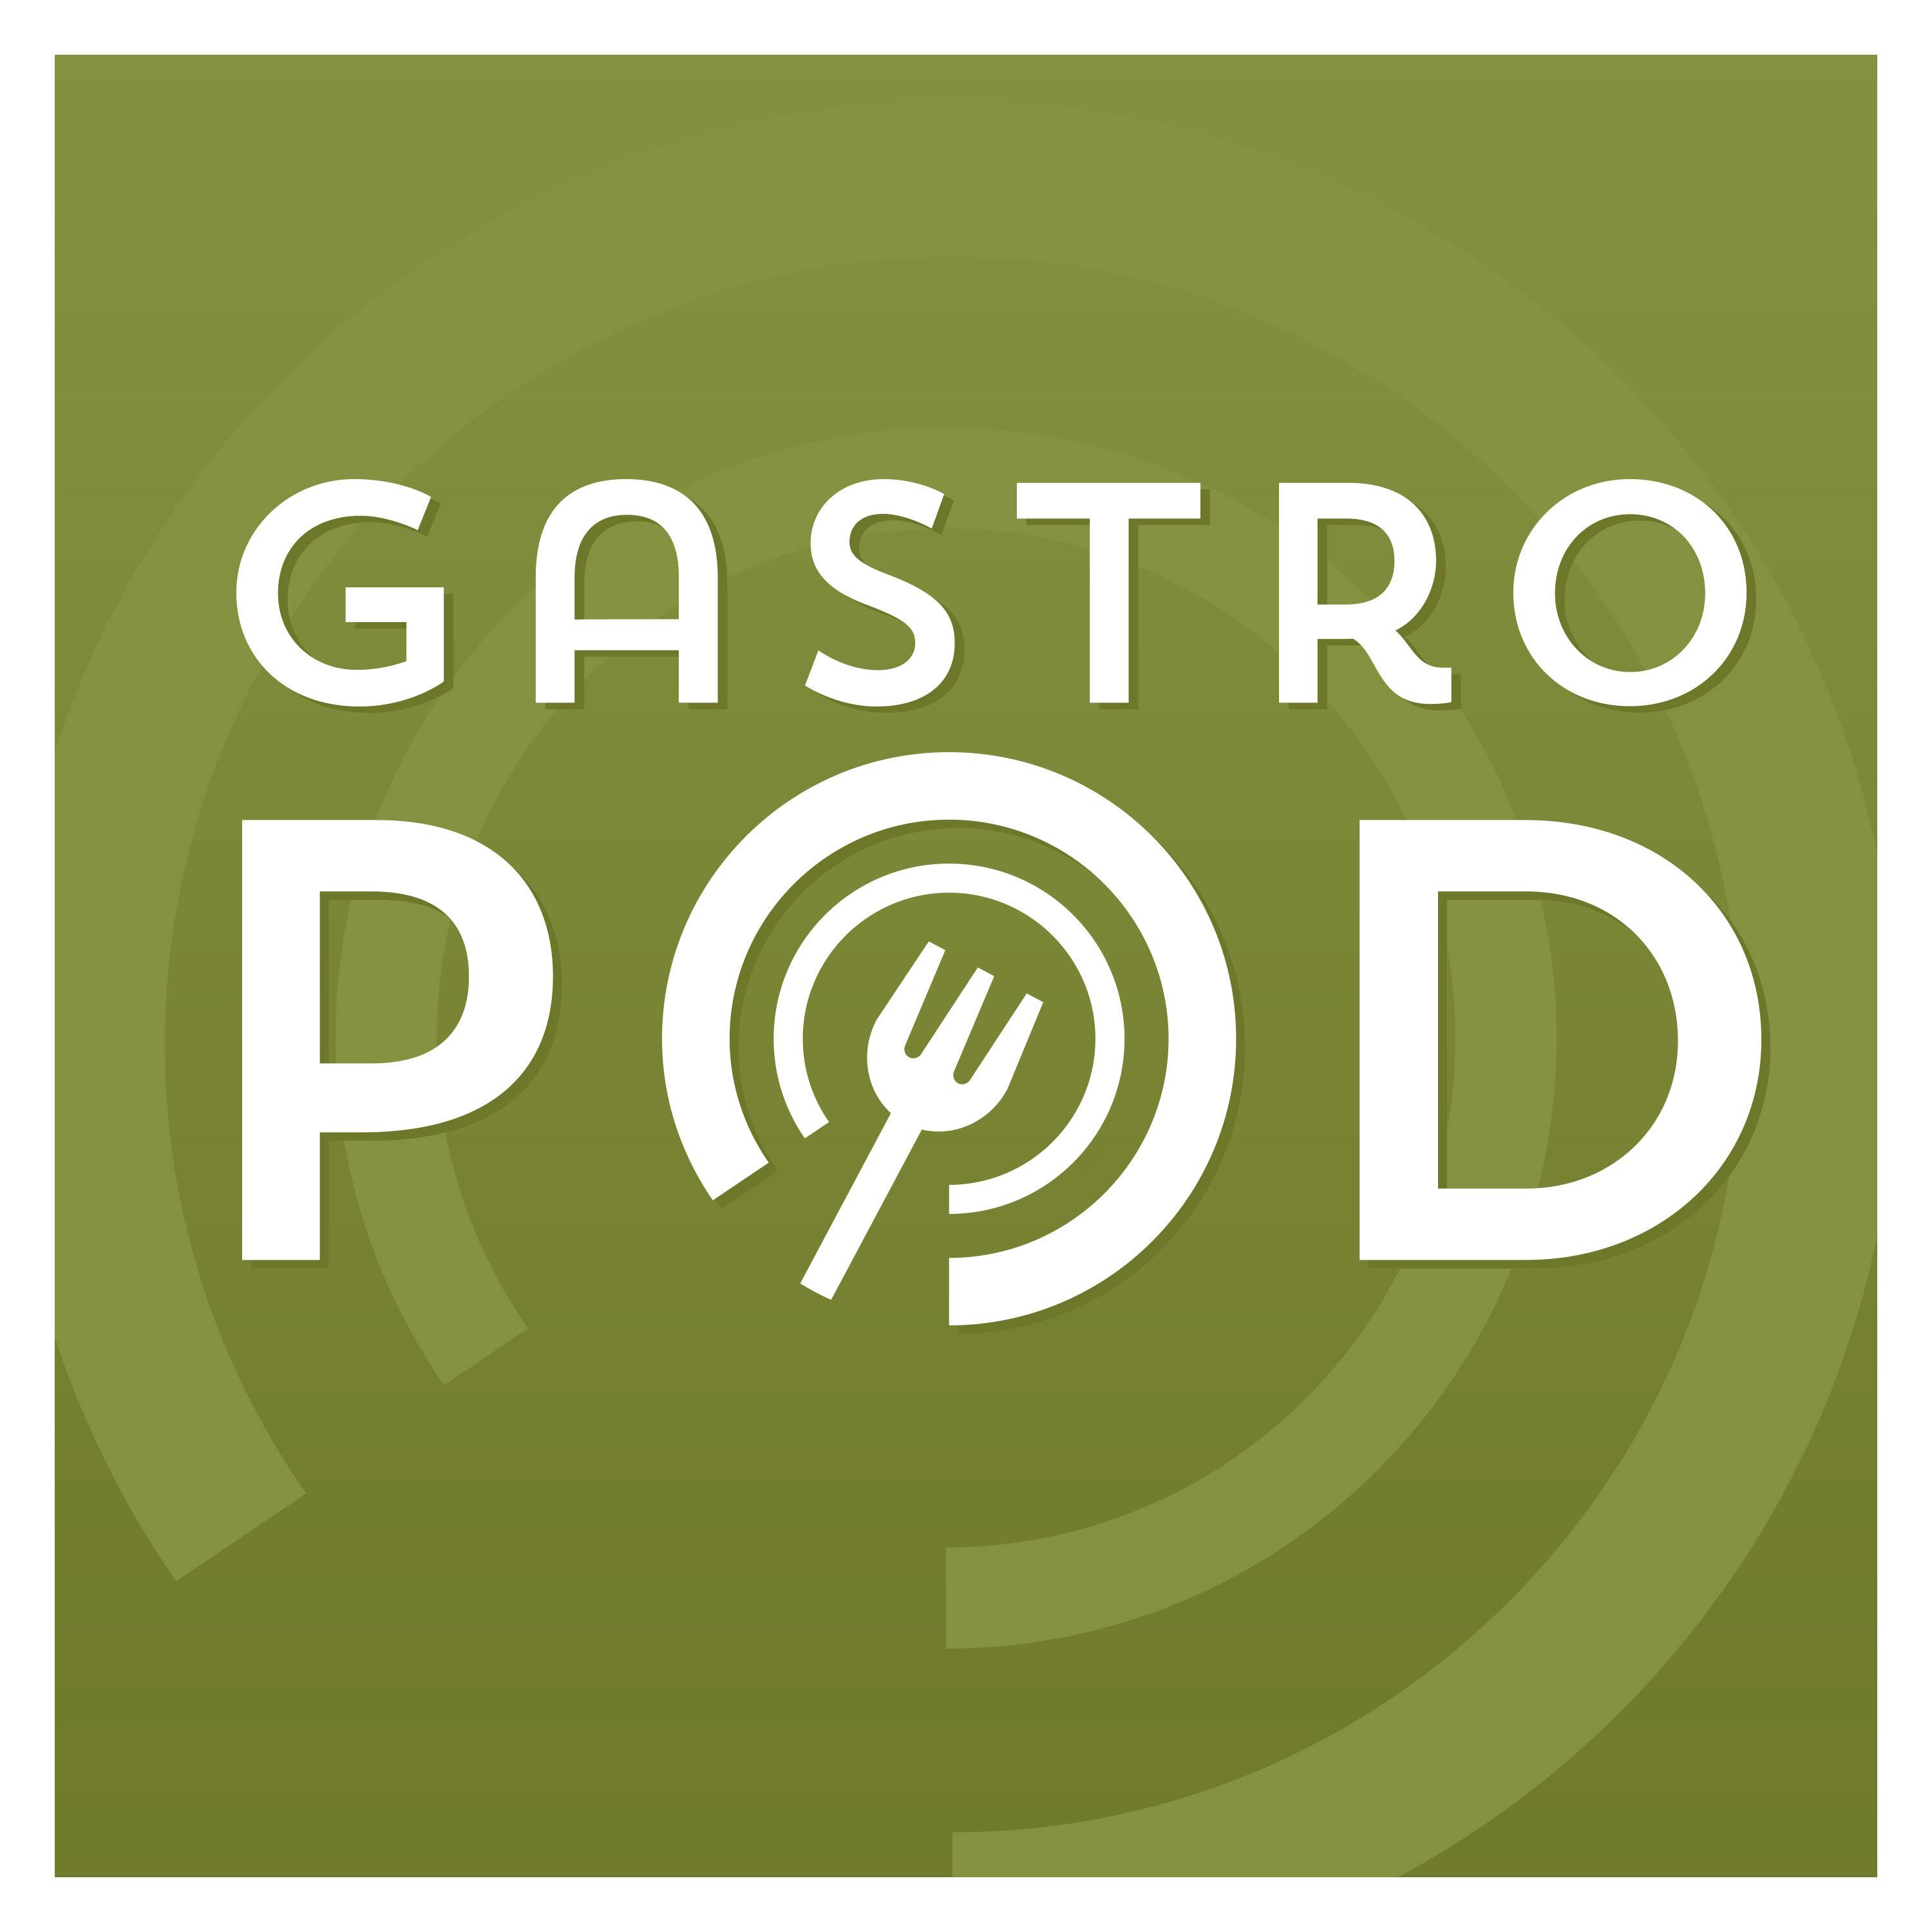 The Great Gastropod Pudding Off